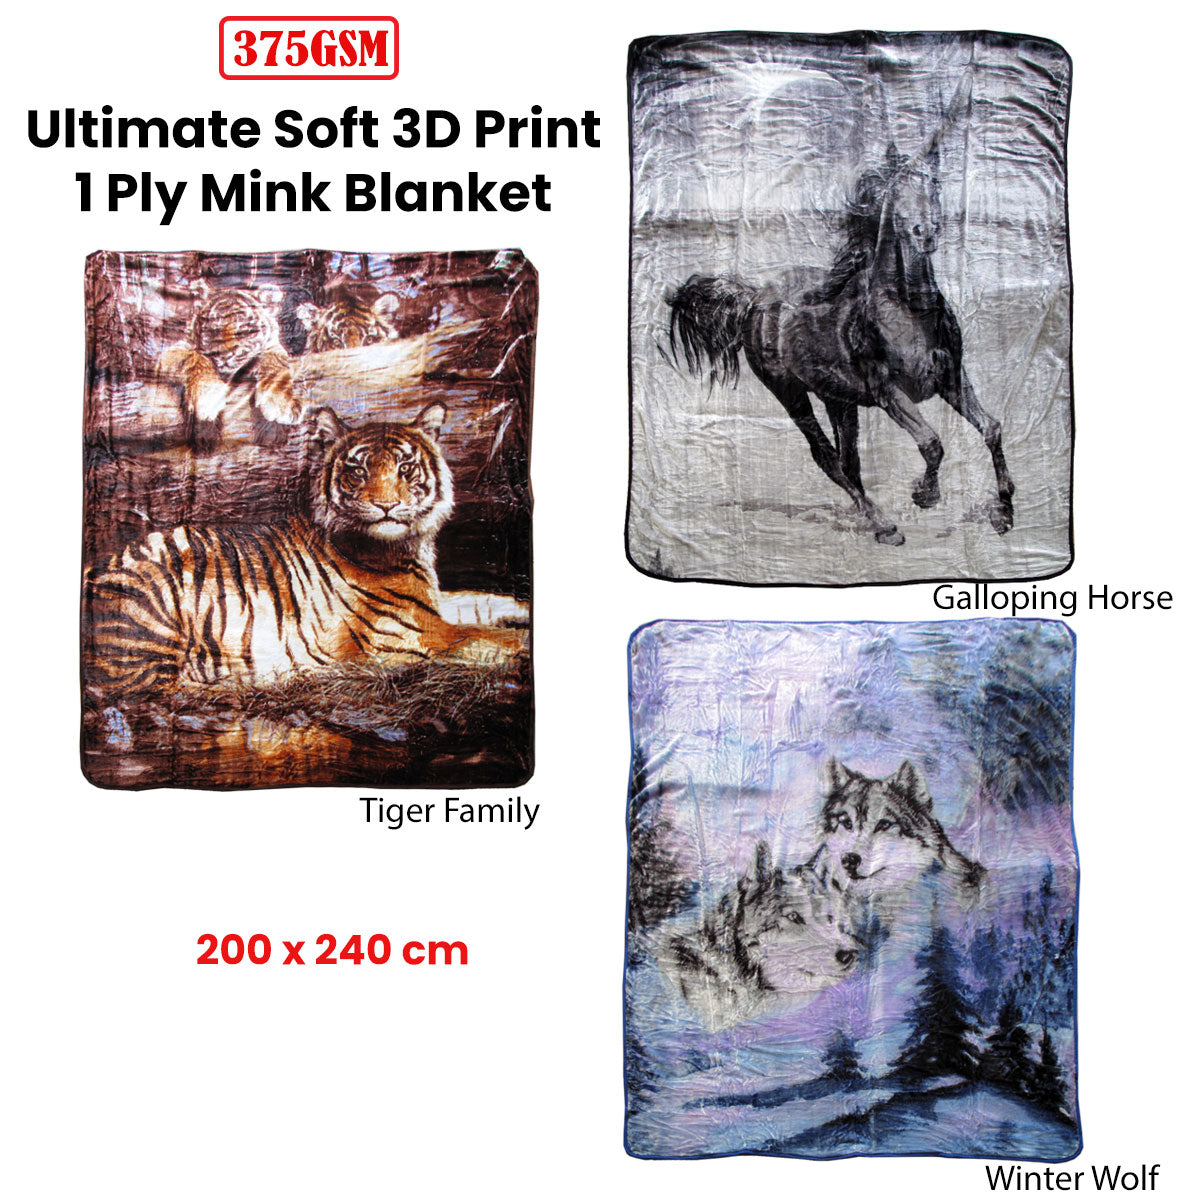 375gsm 1 Ply 3D Print Faux Mink Blanket Queen 200x240 cm Galloping Horse